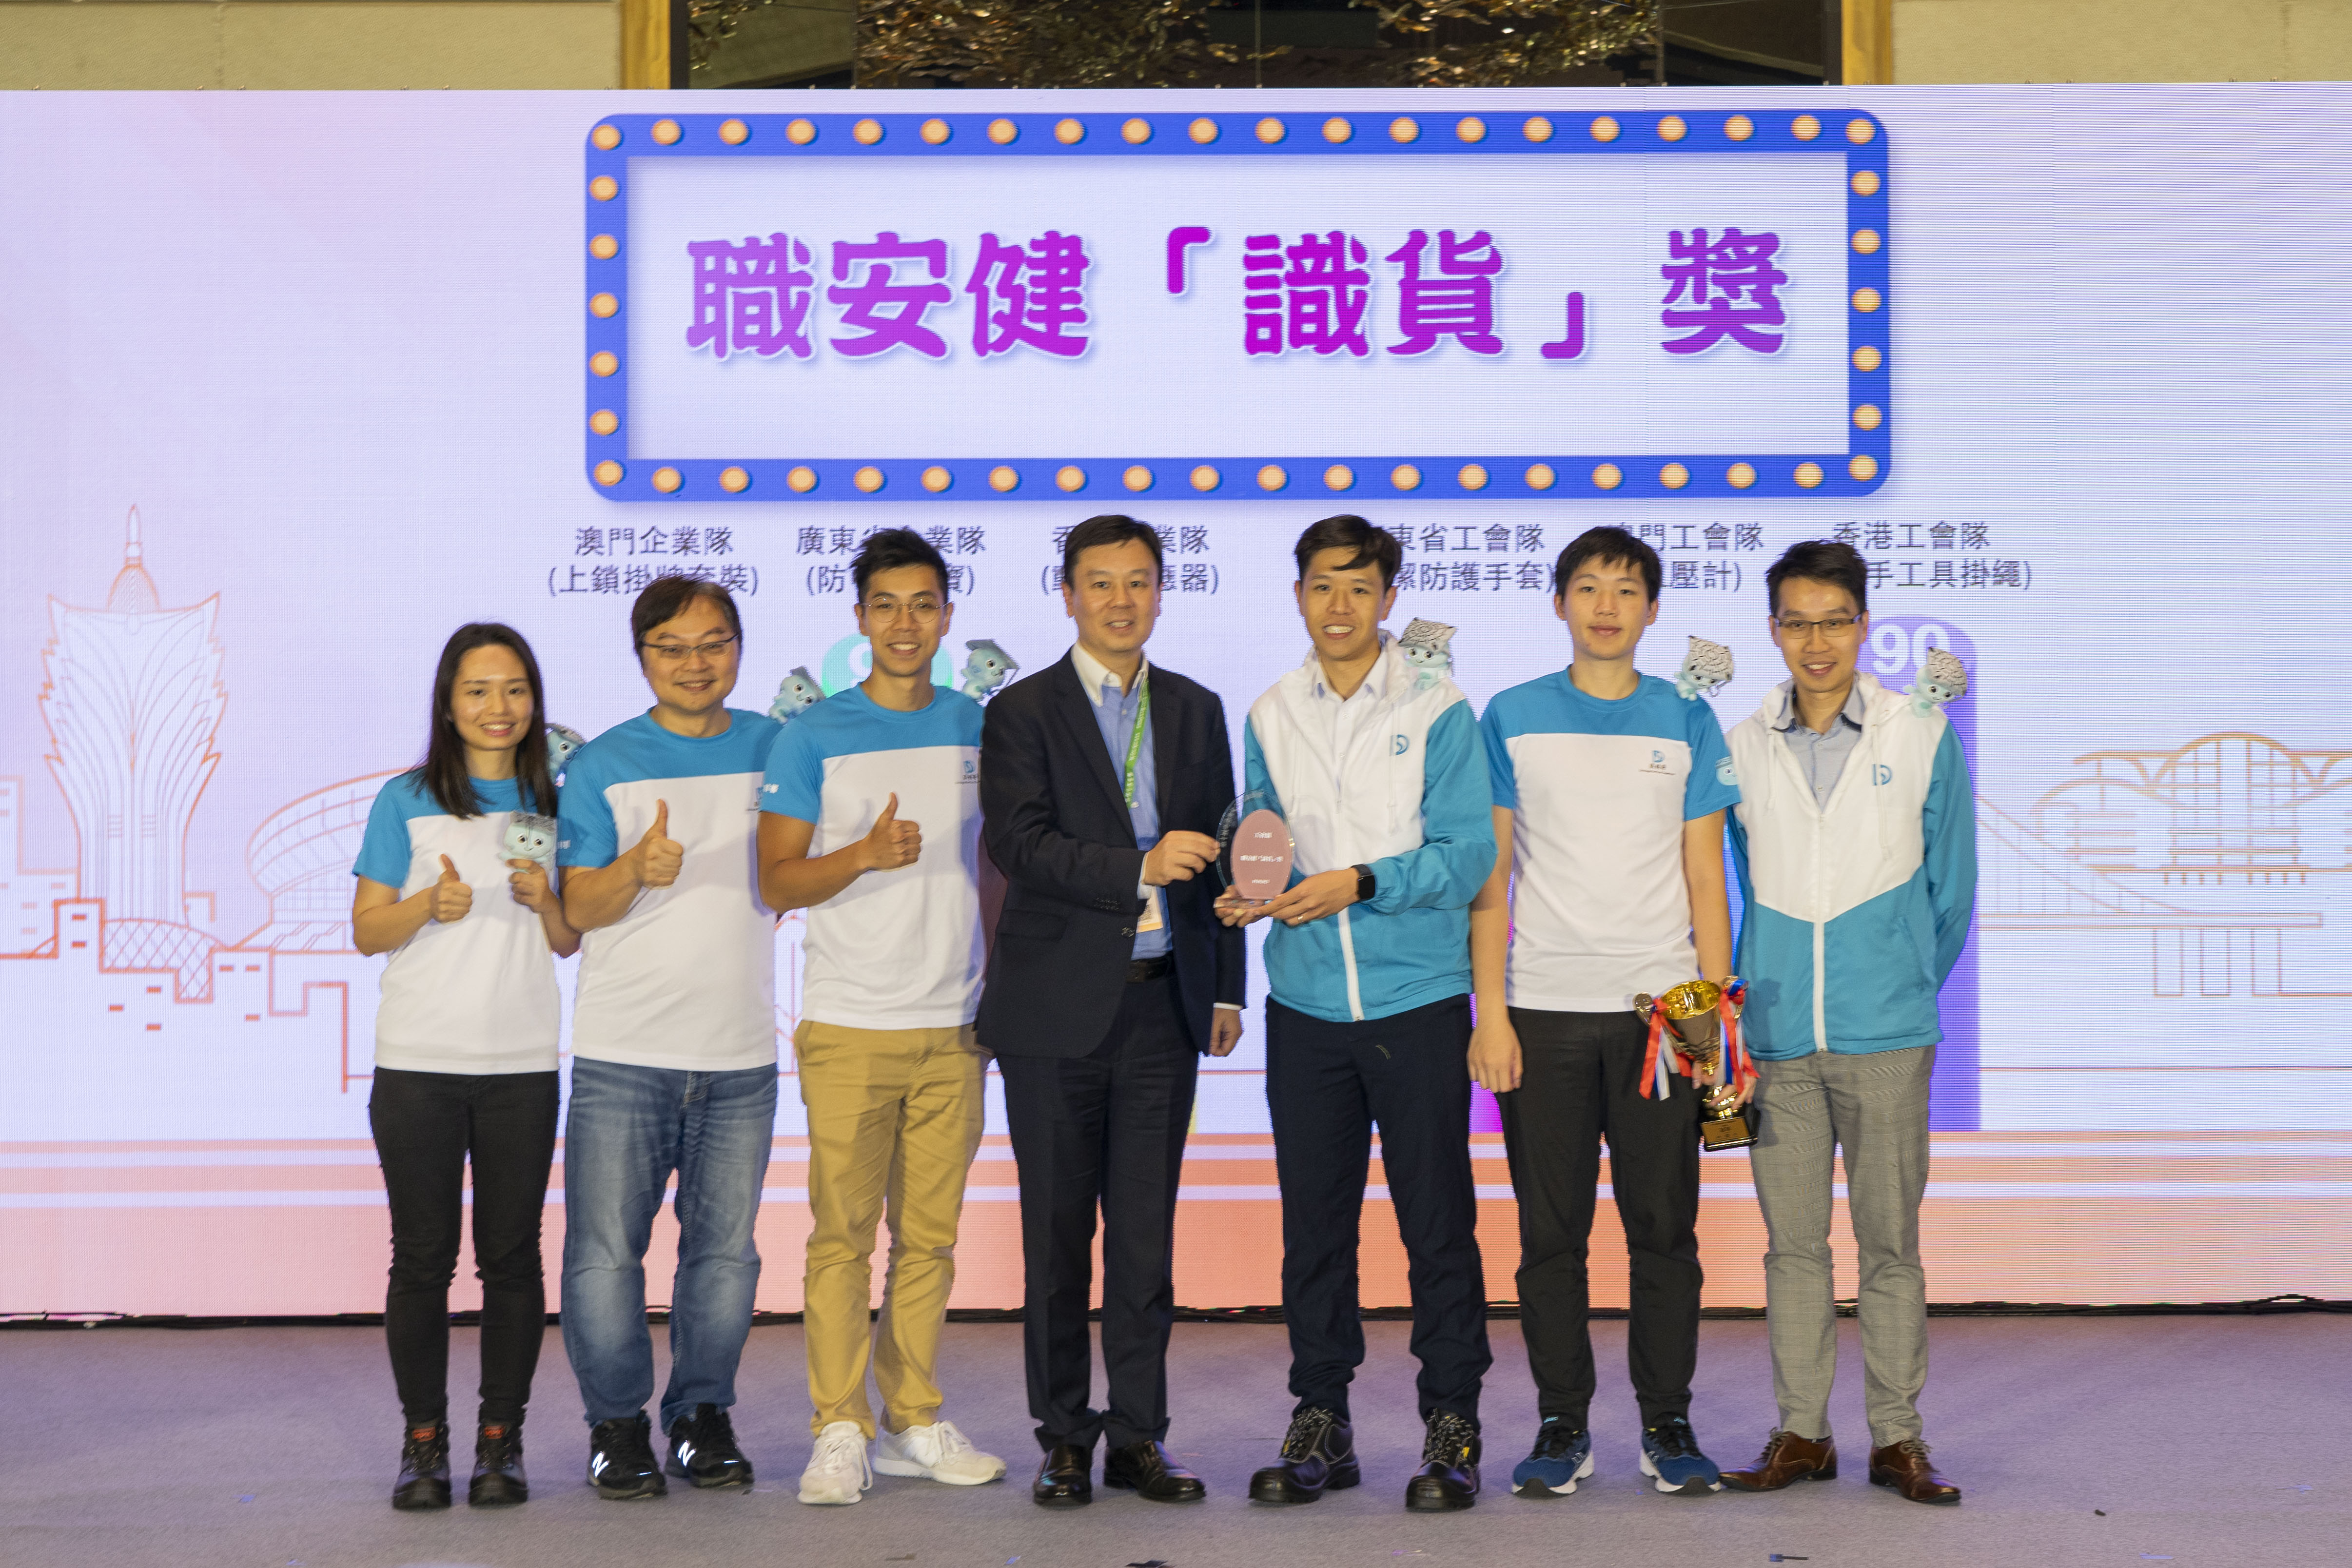 Photo 3: The “OSH Top Sales” Award in "Community / Union” Category was presented by Mr. Vincent FUNG Hao-yin, the Deputy Commissioner (Occupational Safety and Health) (middle) to the DSD’s “E&M Safety Team”.